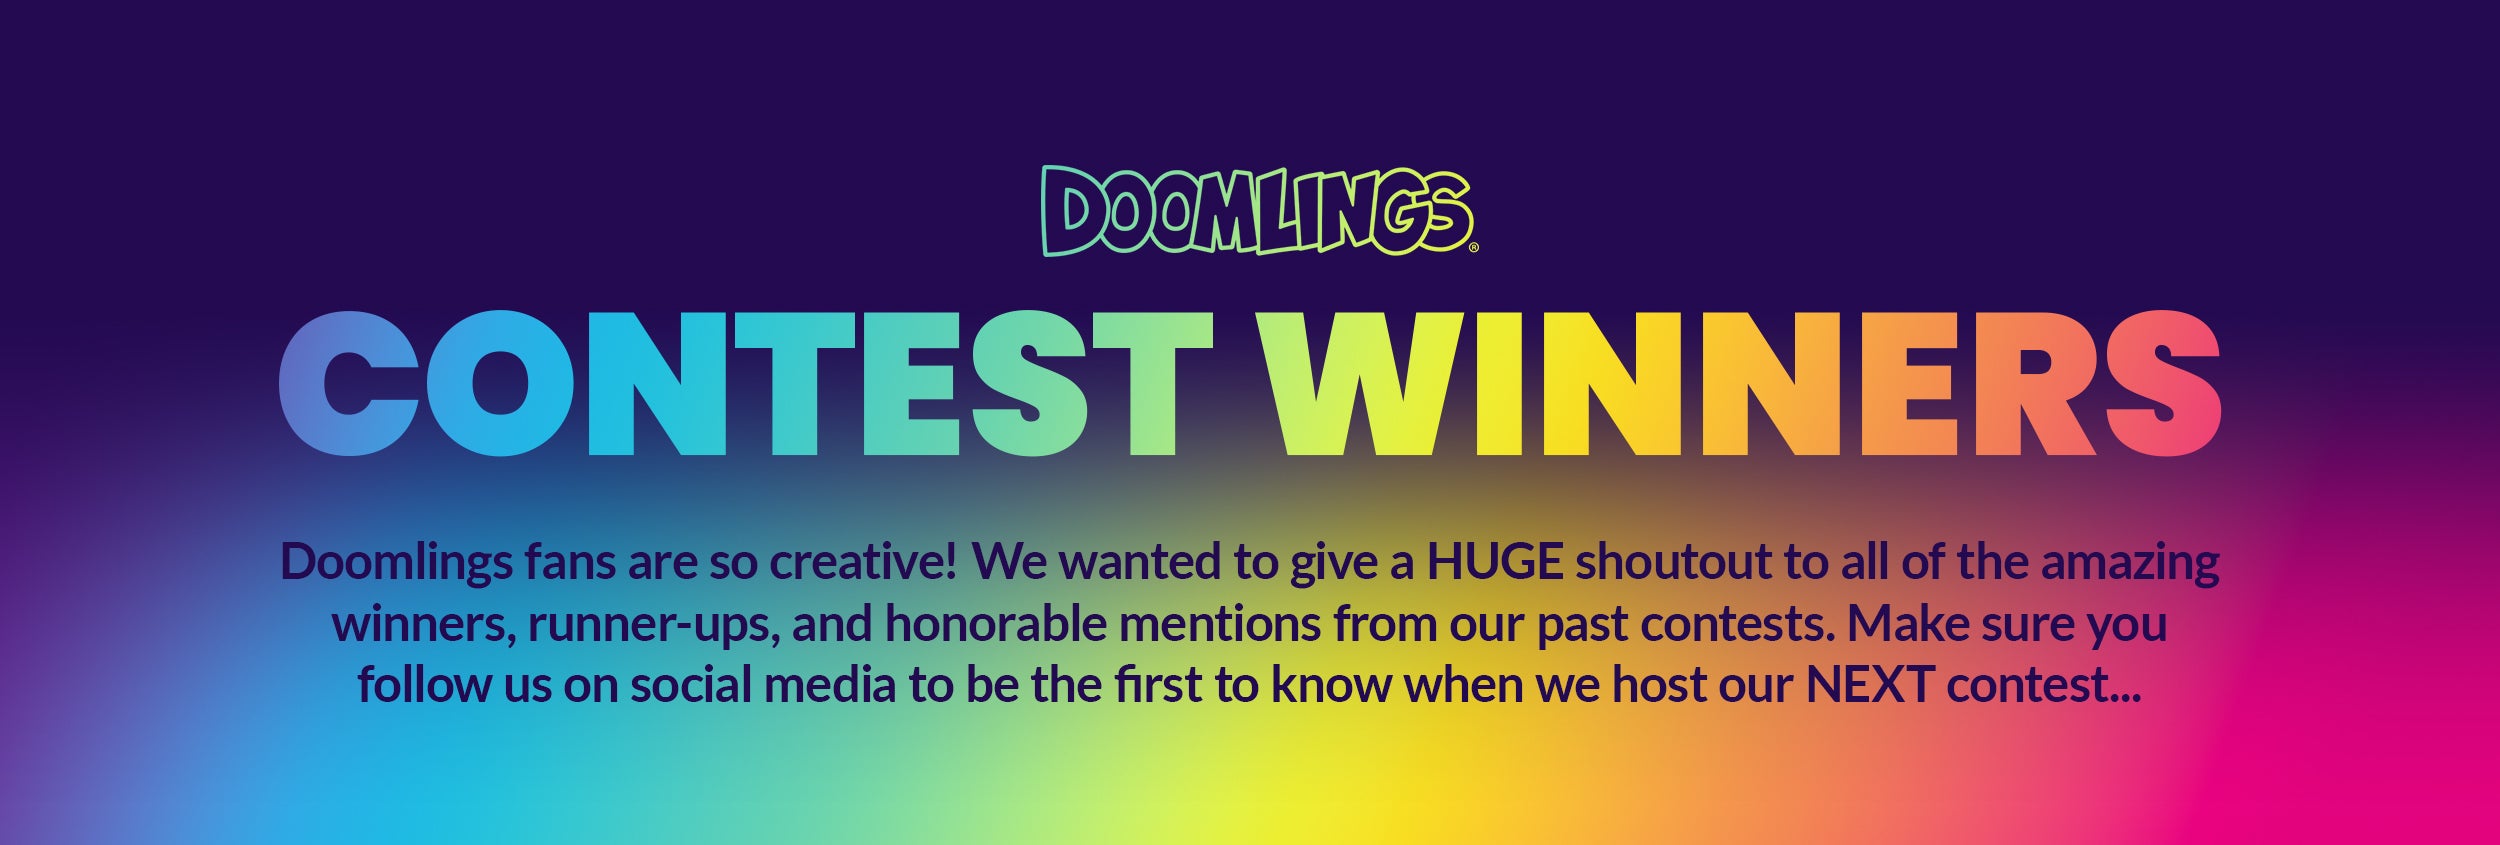 DOOMLINGS CONTEST WINNERS - Doomlings fans are so creative! We wanted to give a HUGE shoutout to all of the amazing winners, runner-ups, and honorable mentions from our past contests. Make sure you follow us on social media to be the first to know when we host our NEXT contest...